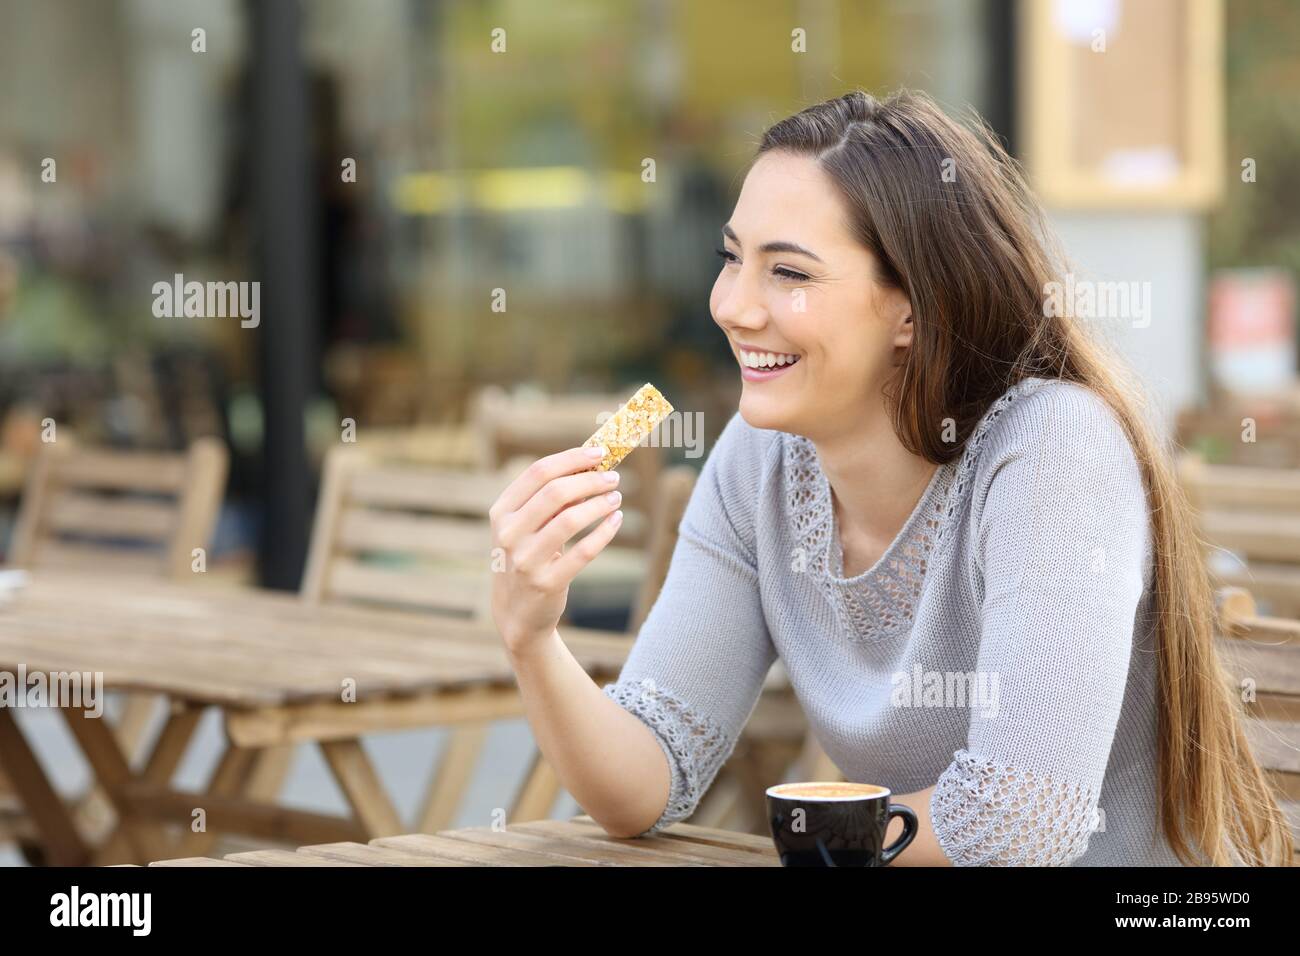 Happy young woman holding a cereal snack bar sitting on a cafe terrace Stock Photo